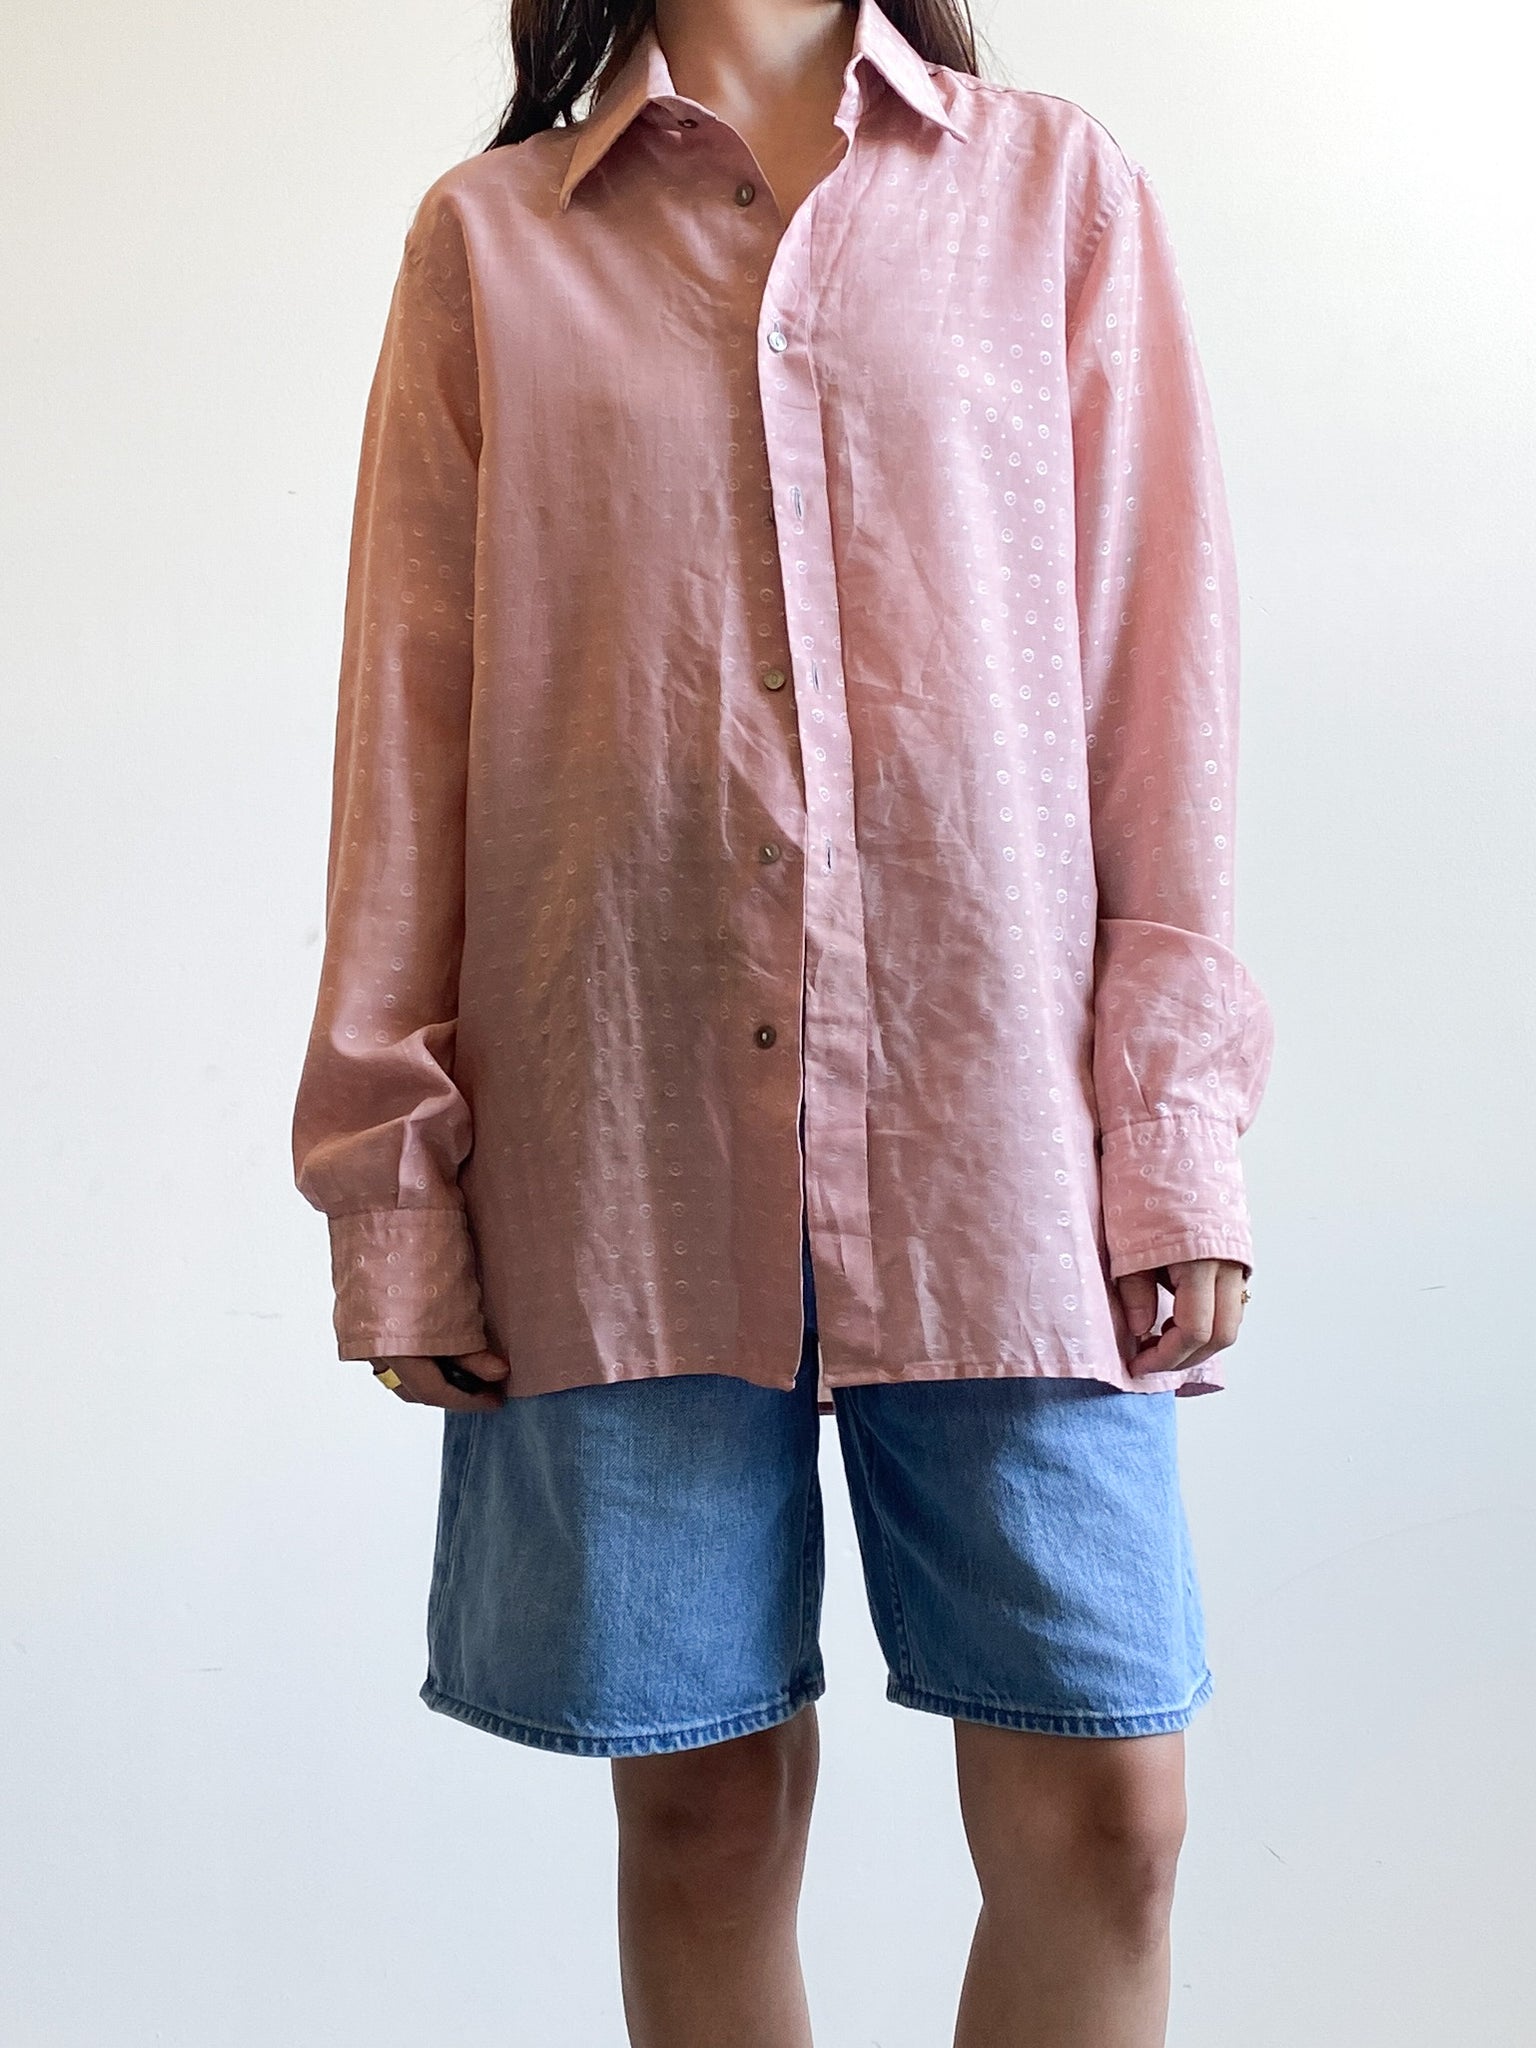 Vintage Pink Patterned Long Sleeve Button Down (M)